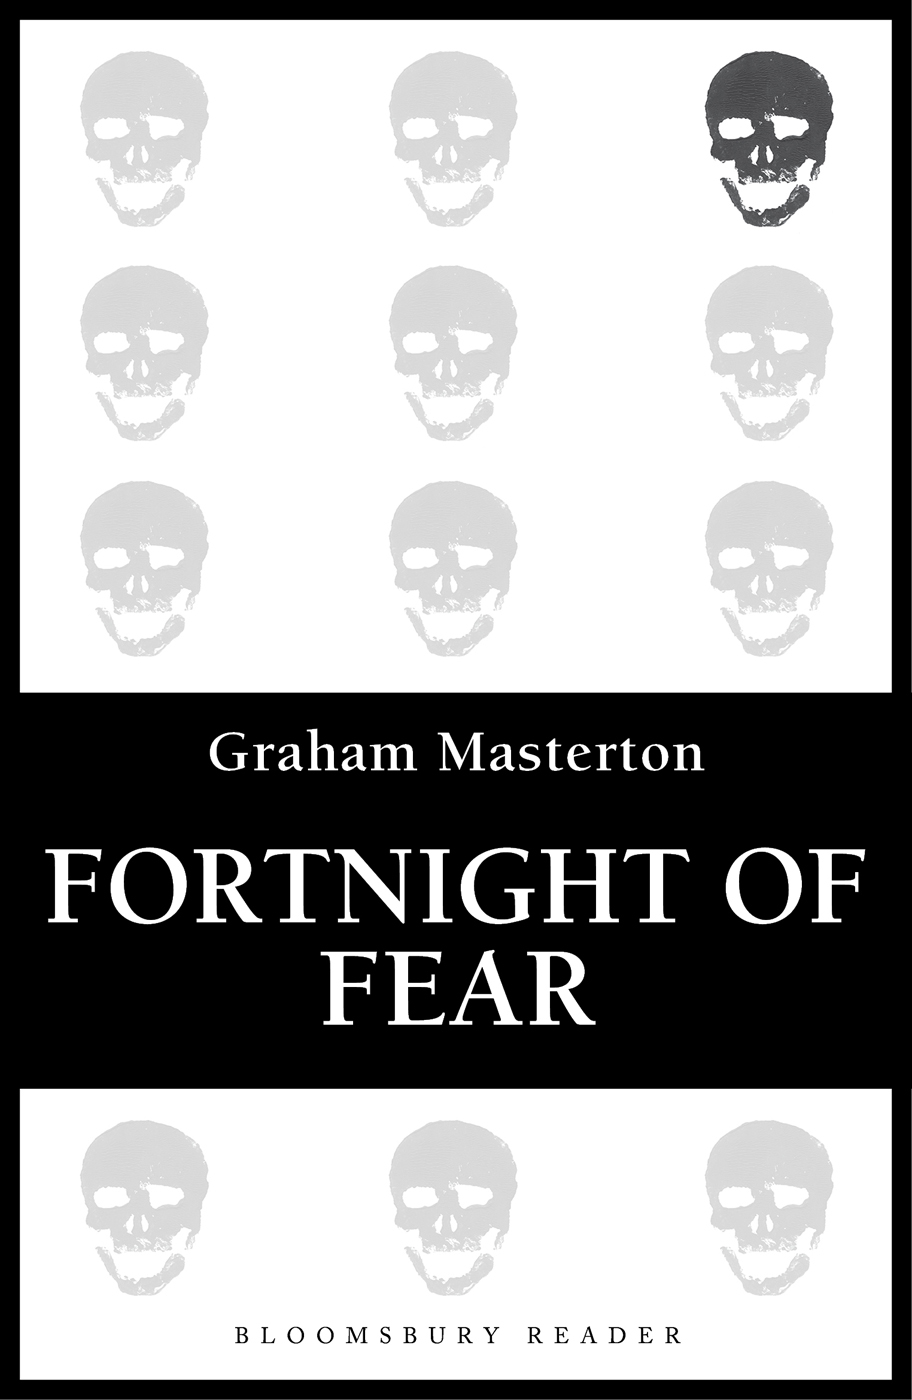 Fortnight of Fear (2013) by Graham Masterton